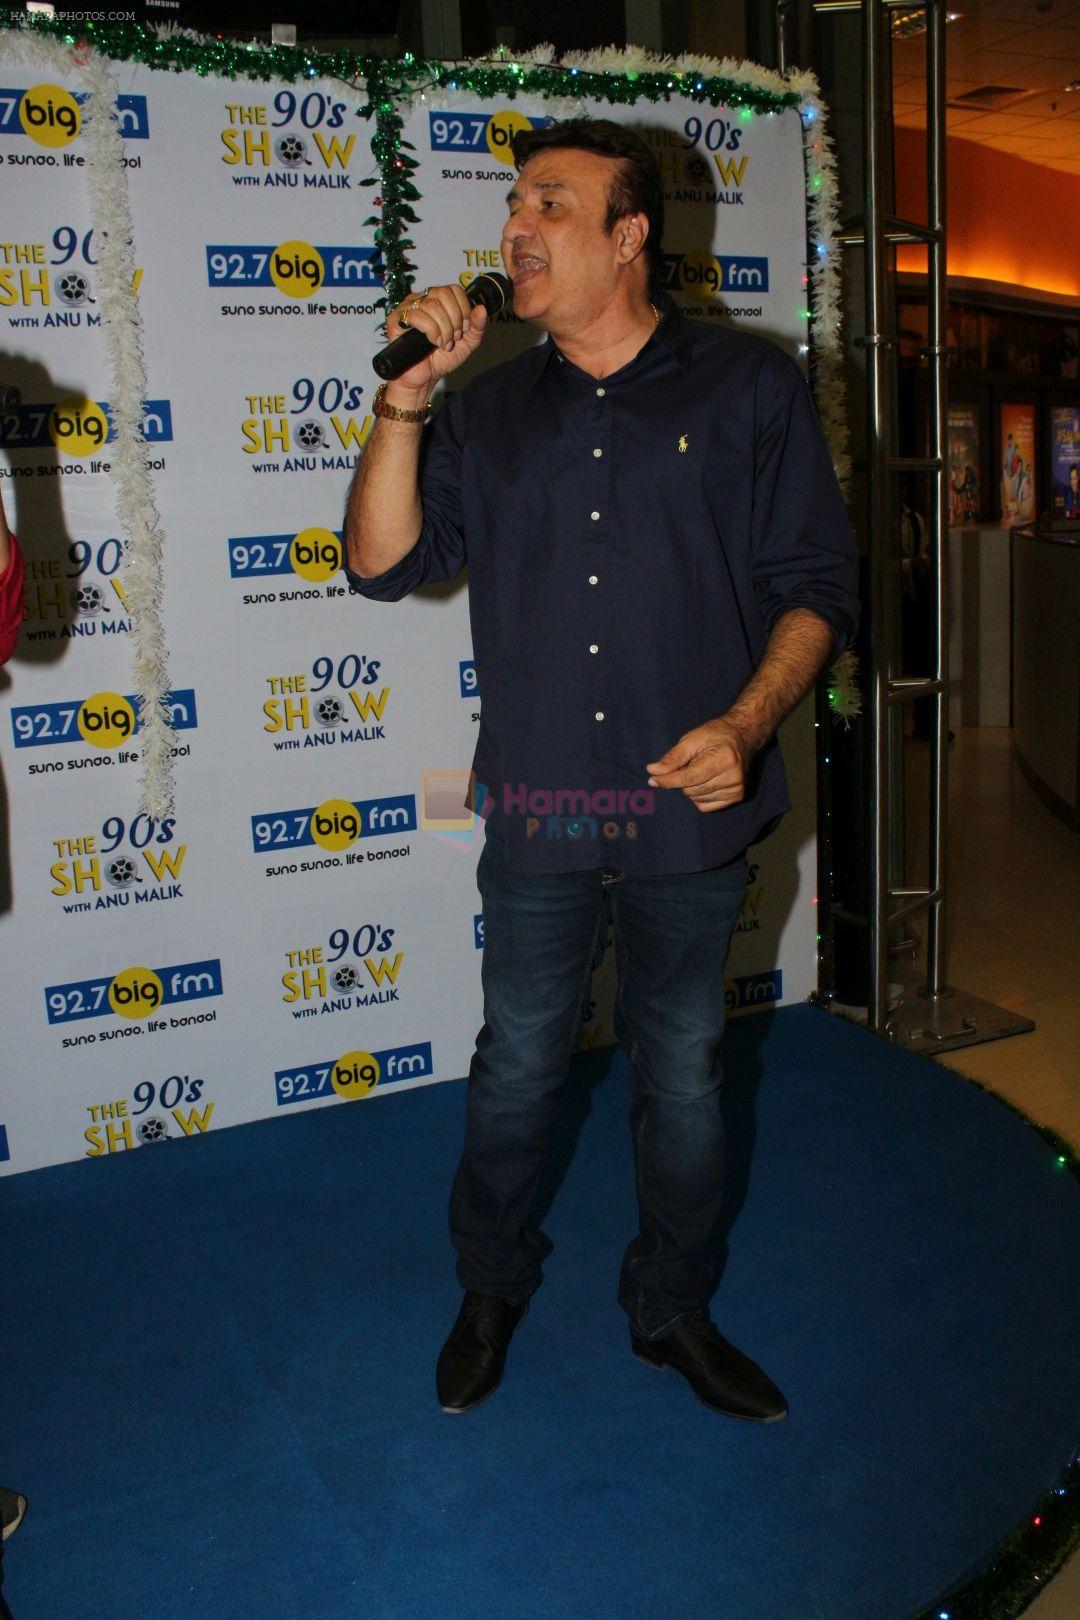 Anu Malik at the Launch Of 90's Show in Big FM on 22nd Dec 2017